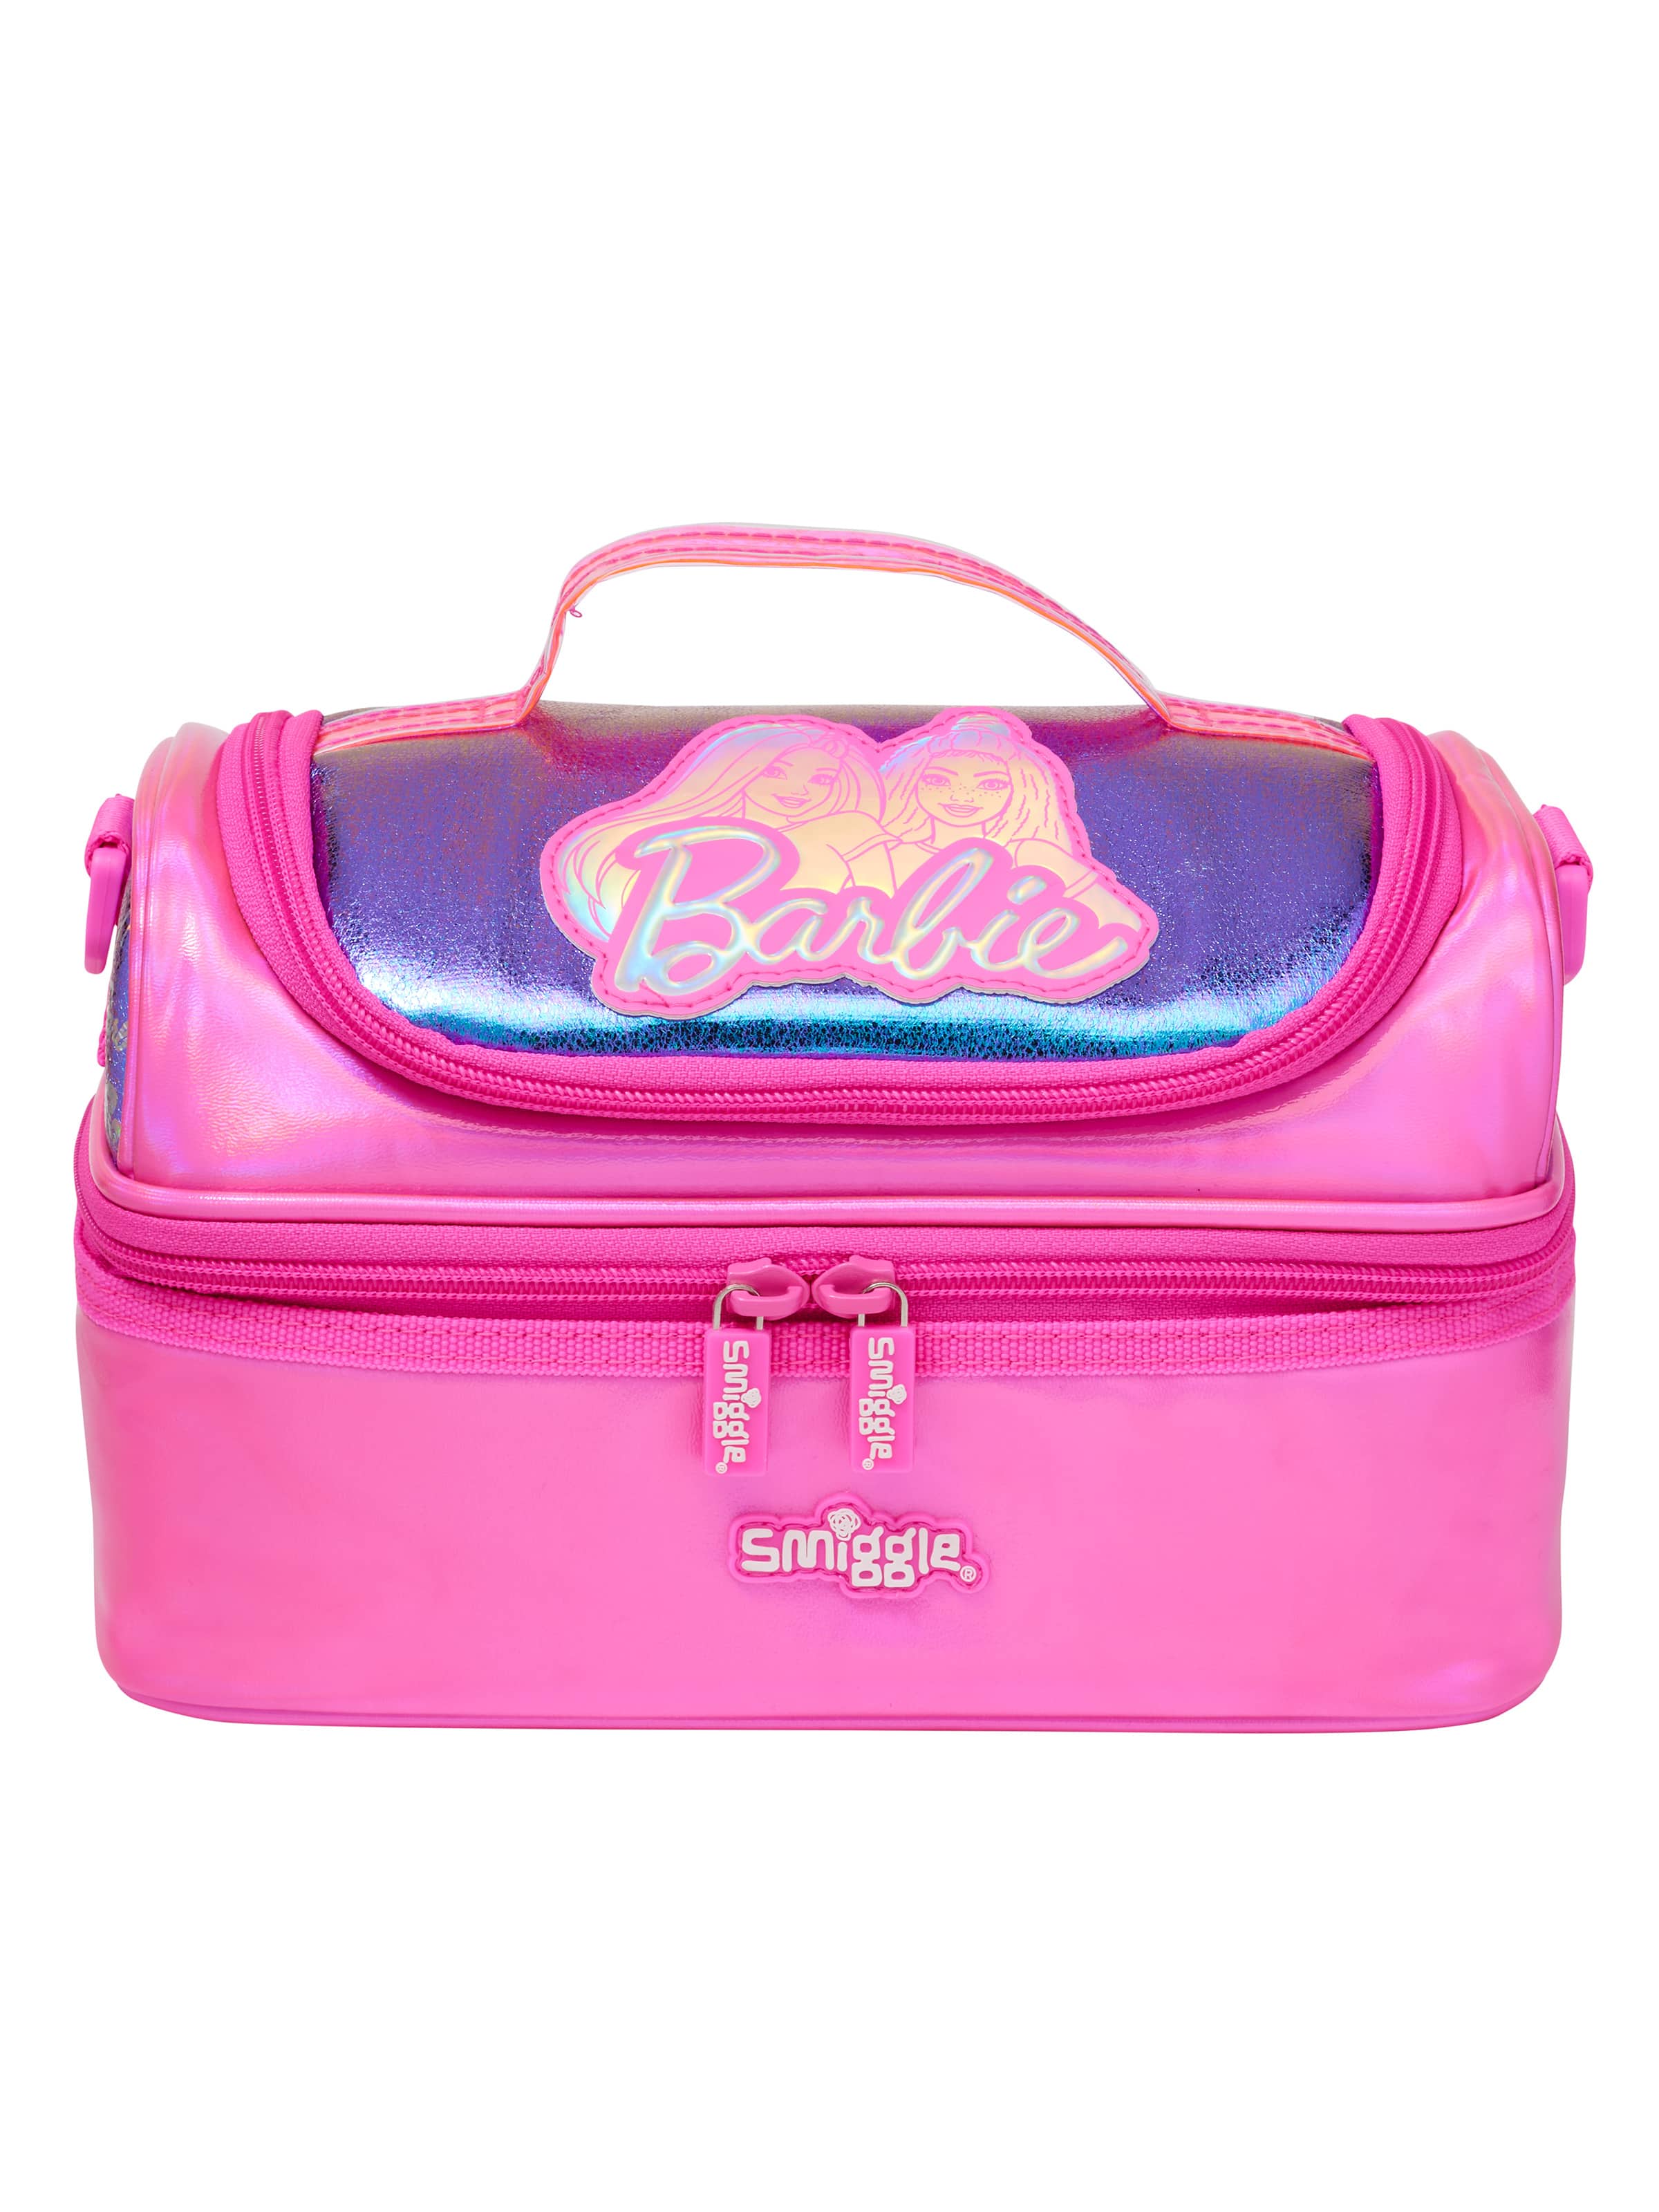 Smiggle, besties,Doc mc stiffen& all pink lunch boxes lunch boxes | in  Guildford, Surrey | Gumtree